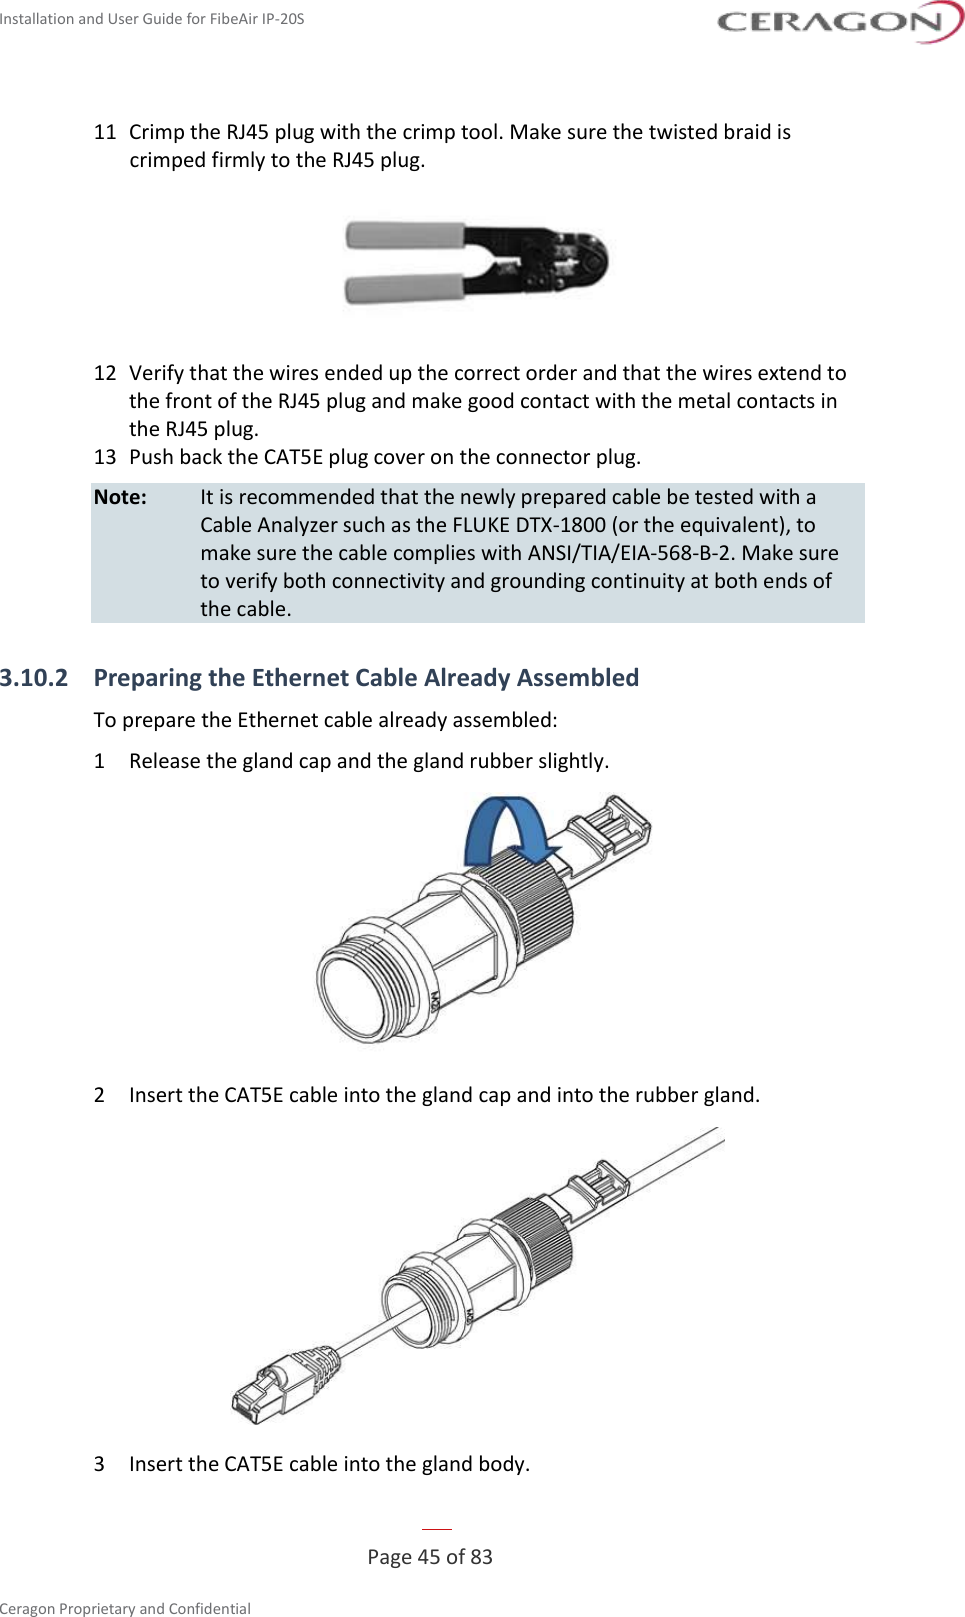 Installation and User Guide for FibeAir IP-20S   Page 45 of 83  Ceragon Proprietary and Confidential     11  Crimp the RJ45 plug with the crimp tool. Make sure the twisted braid is crimped firmly to the RJ45 plug.  12  Verify that the wires ended up the correct order and that the wires extend to the front of the RJ45 plug and make good contact with the metal contacts in the RJ45 plug. 13  Push back the CAT5E plug cover on the connector plug. Note:   It is recommended that the newly prepared cable be tested with a Cable Analyzer such as the FLUKE DTX-1800 (or the equivalent), to make sure the cable complies with ANSI/TIA/EIA-568-B-2. Make sure to verify both connectivity and grounding continuity at both ends of the cable. 3.10.2 Preparing the Ethernet Cable Already Assembled To prepare the Ethernet cable already assembled: 1  Release the gland cap and the gland rubber slightly.  2  Insert the CAT5E cable into the gland cap and into the rubber gland.  3  Insert the CAT5E cable into the gland body. 